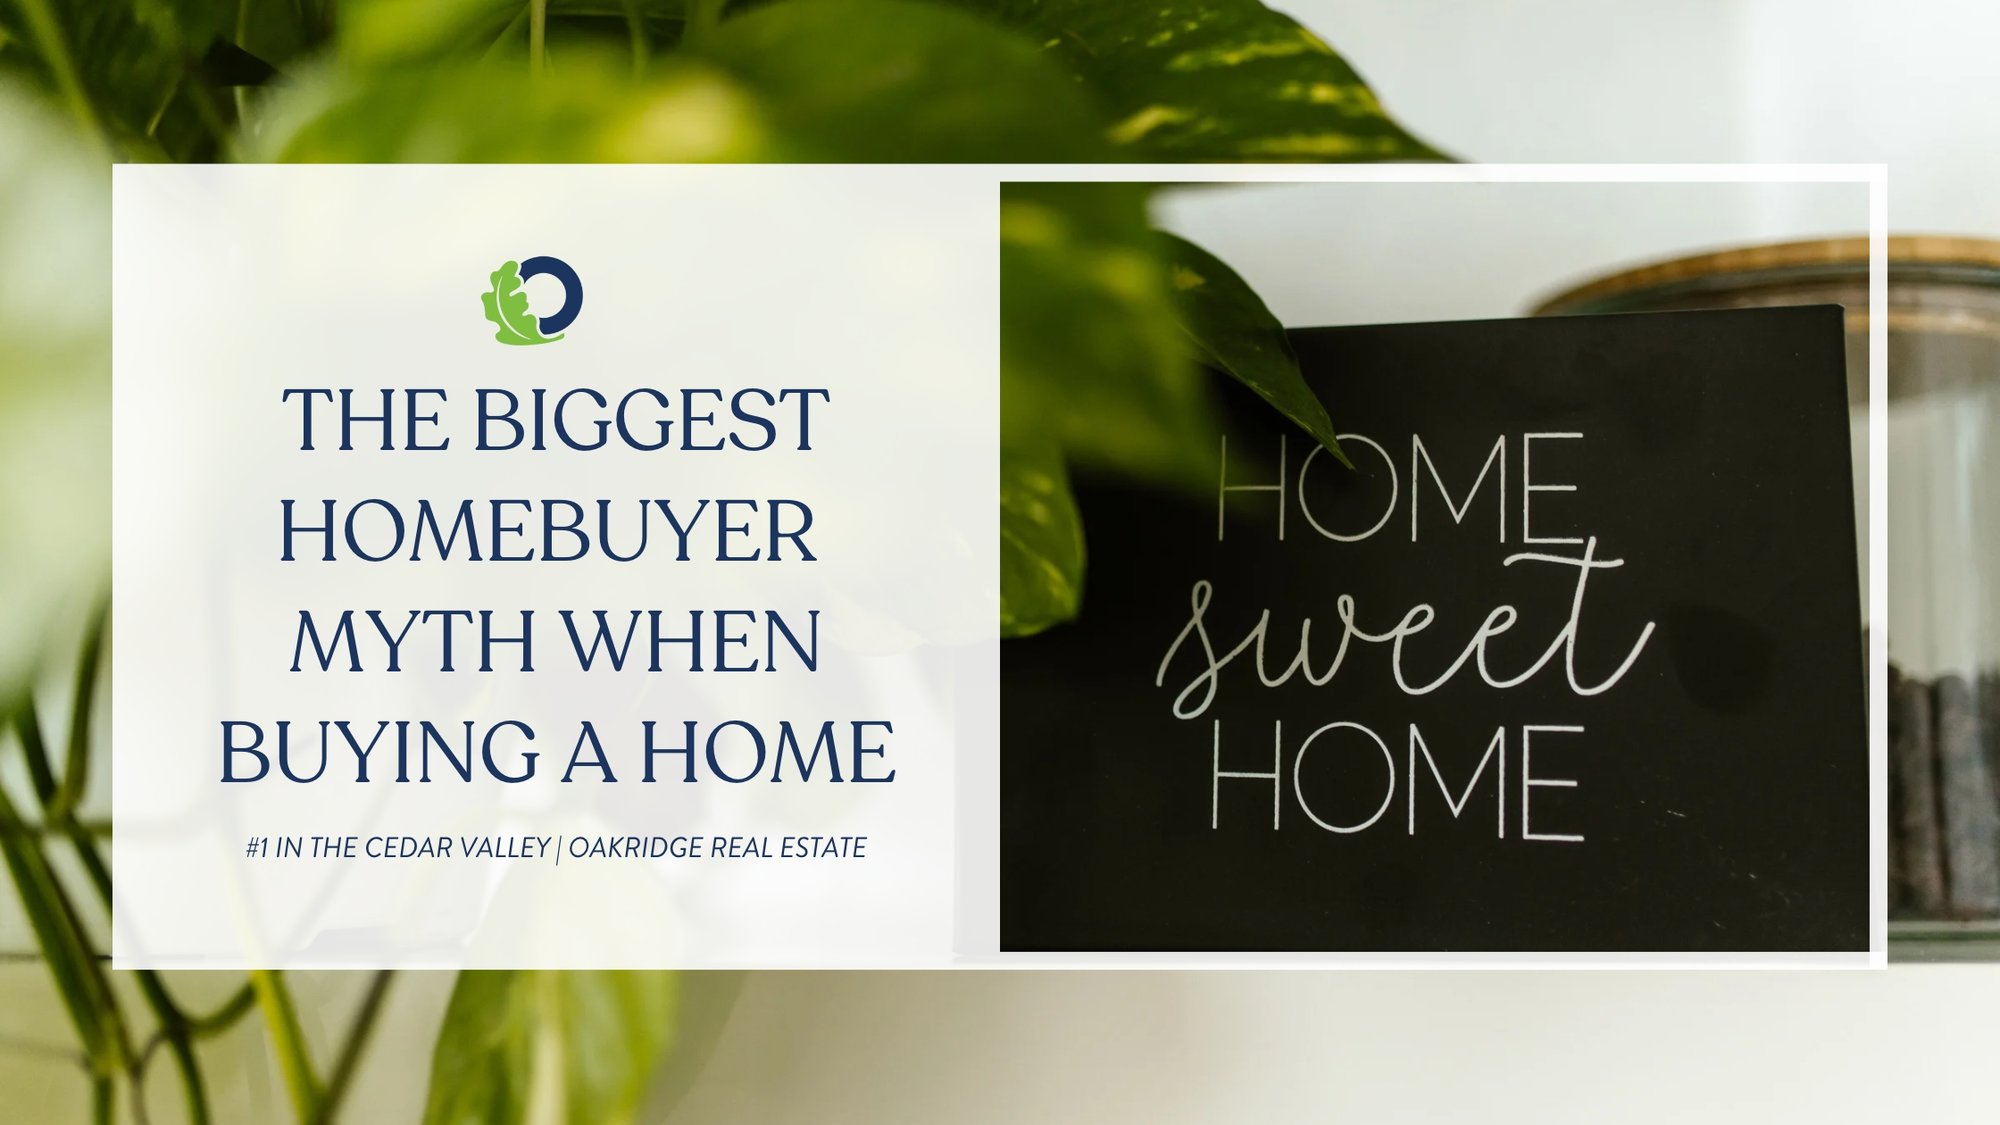 The Biggest Homebuyer Myth When Buying a Home | Oakridge Real Estate